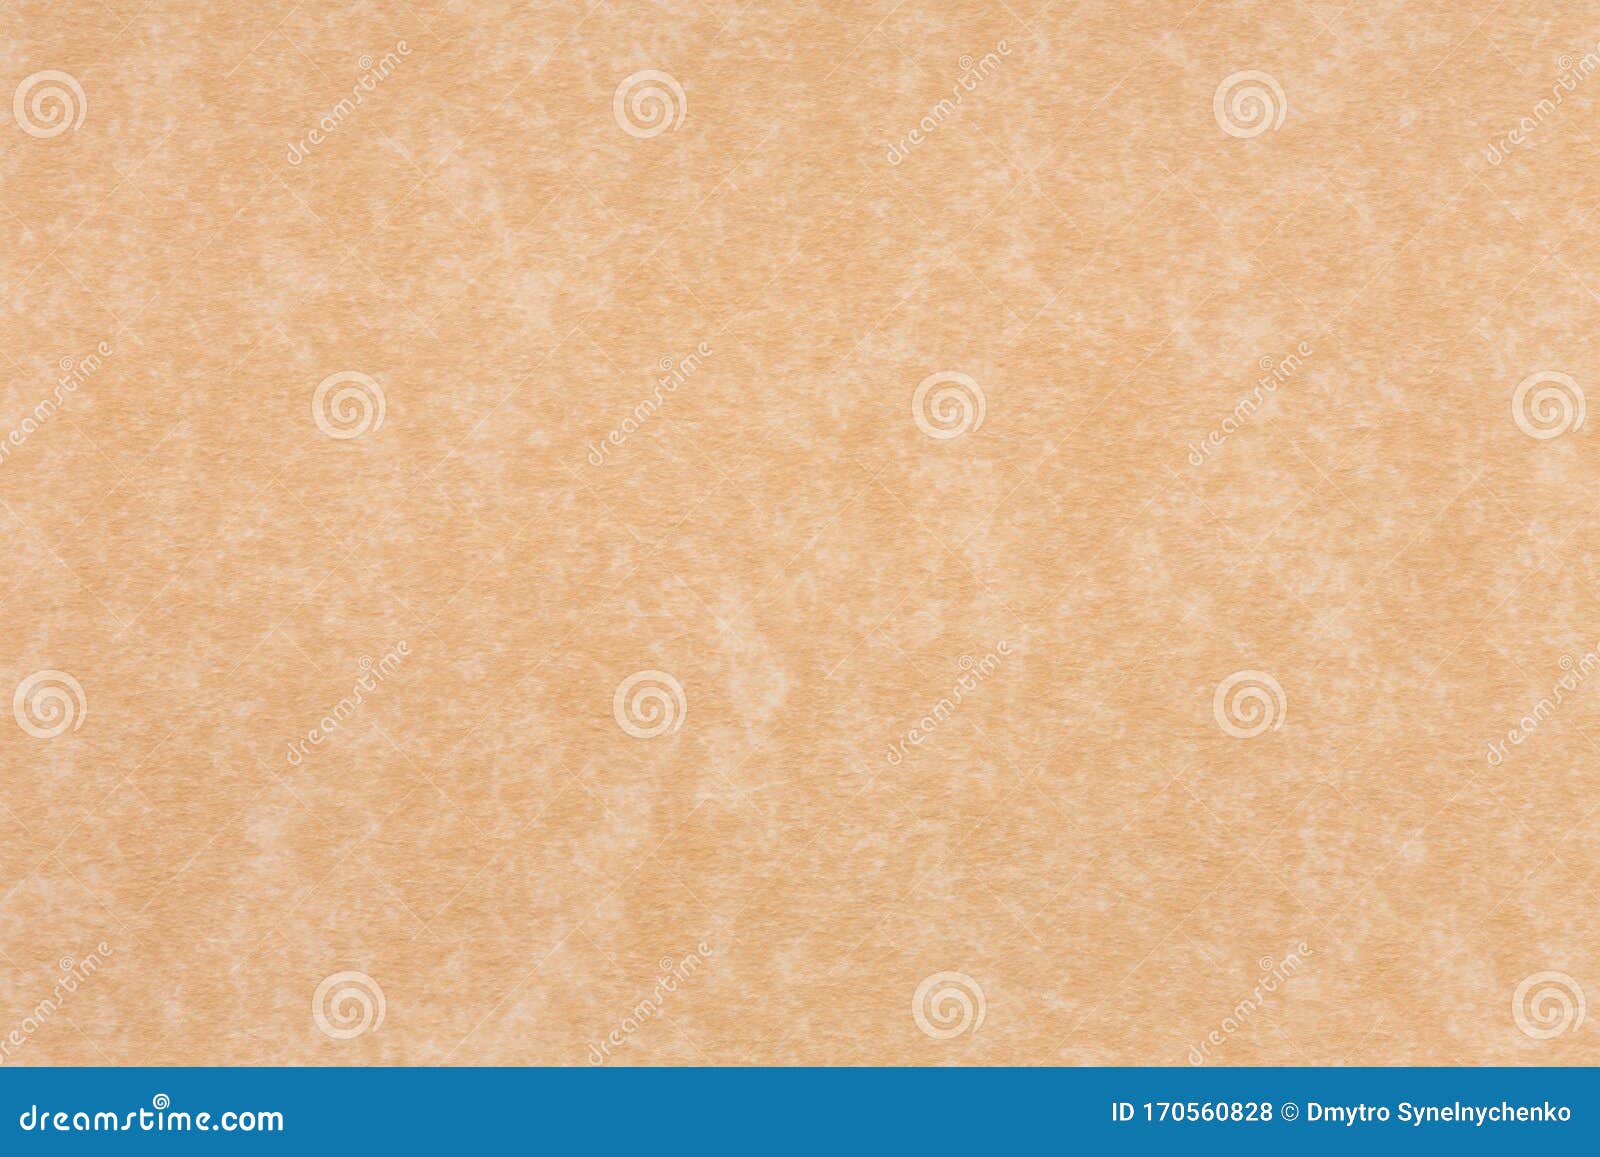 Abstract Brown Background or Brown Paper Parchment with Soft Texture or Tan  Cream Colored. Stock Photo - Image of painting, plain: 170560828